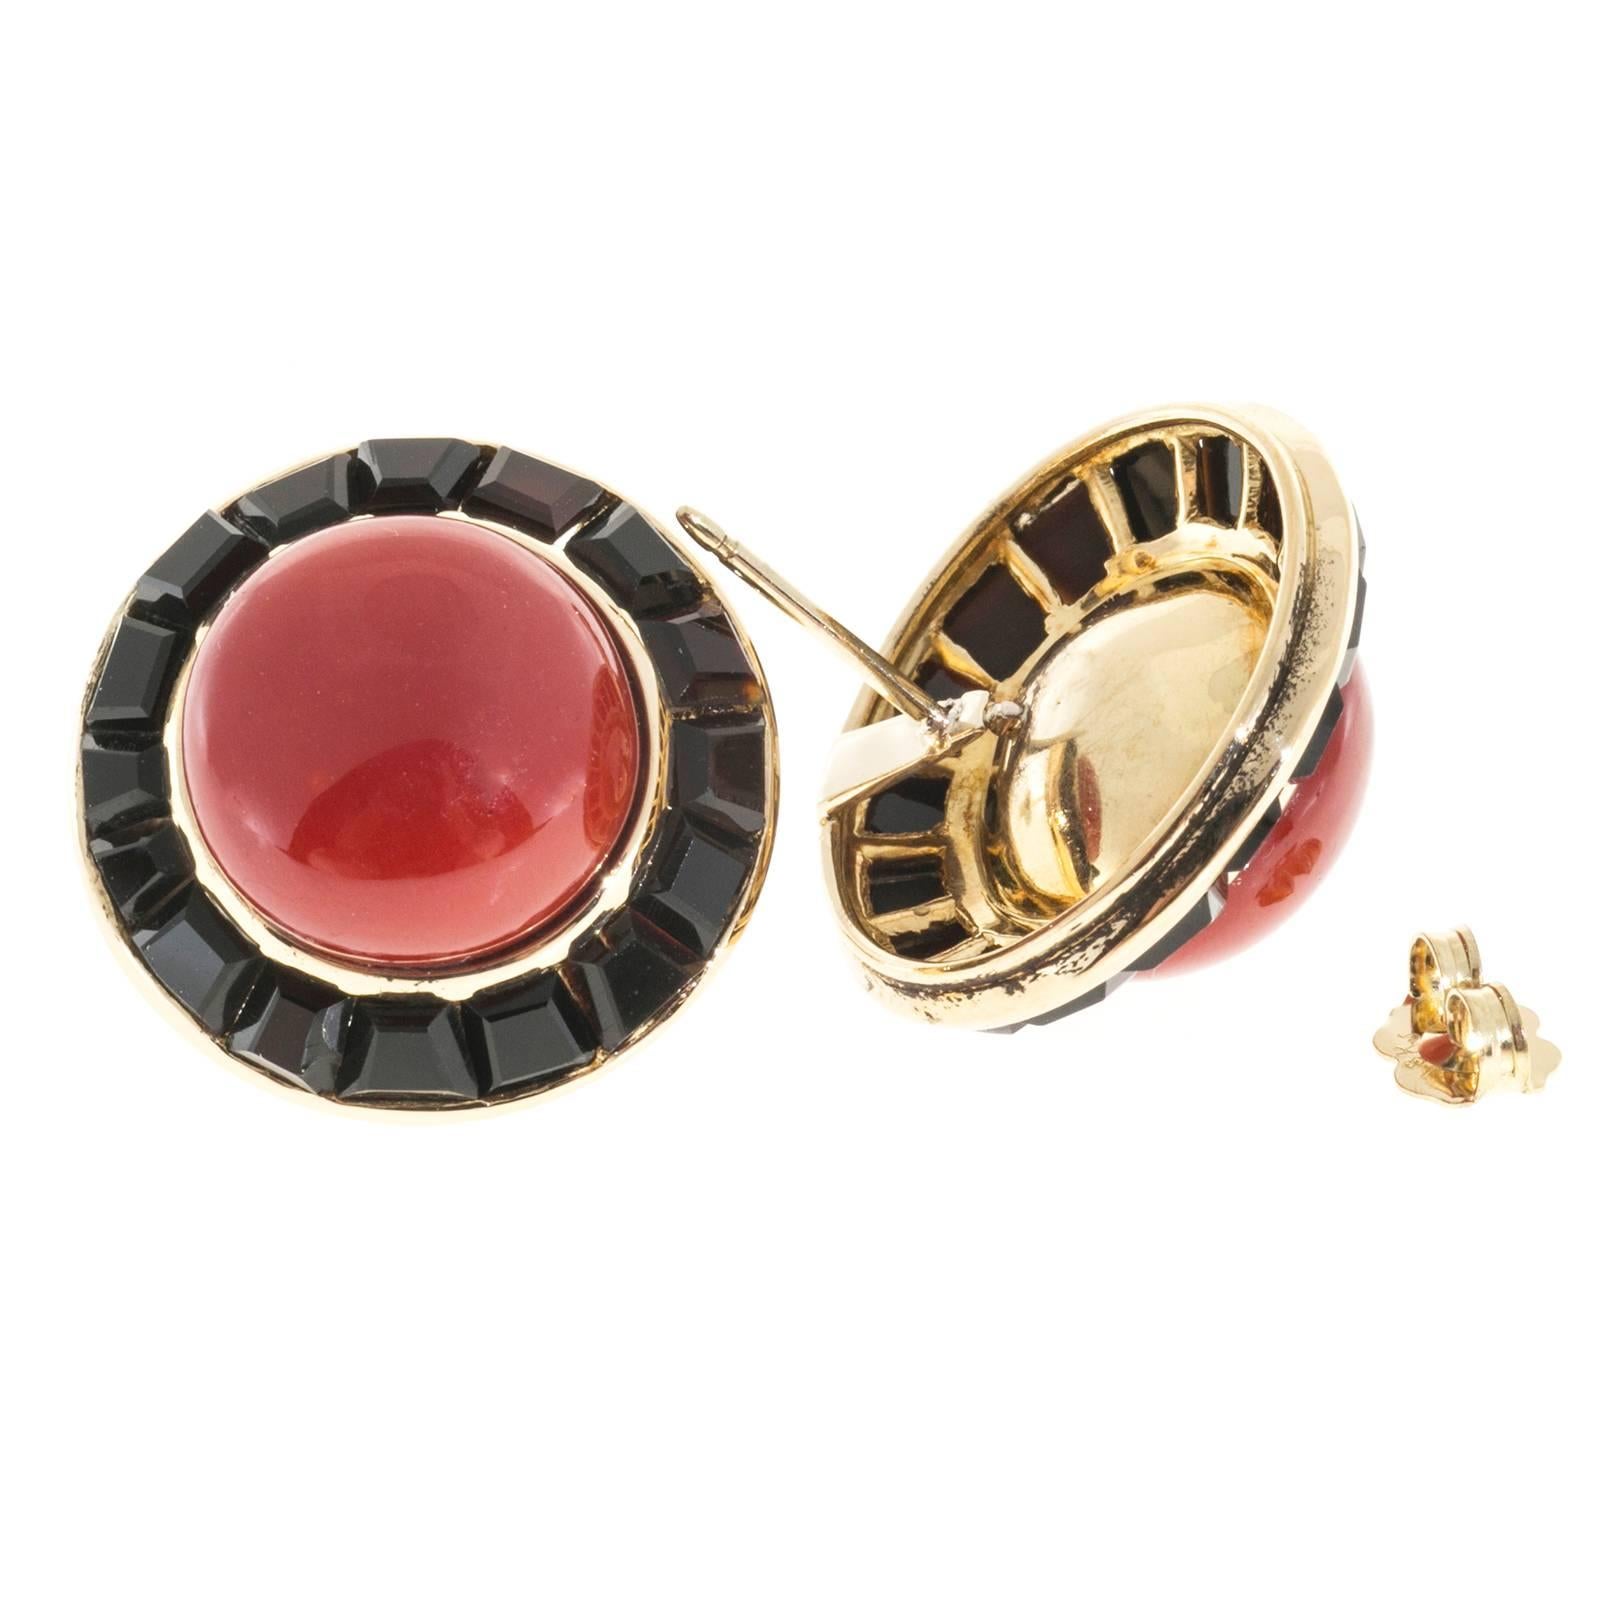 Cabochon Red Coral Black Onyx Gold Earrings  In Good Condition For Sale In Stamford, CT